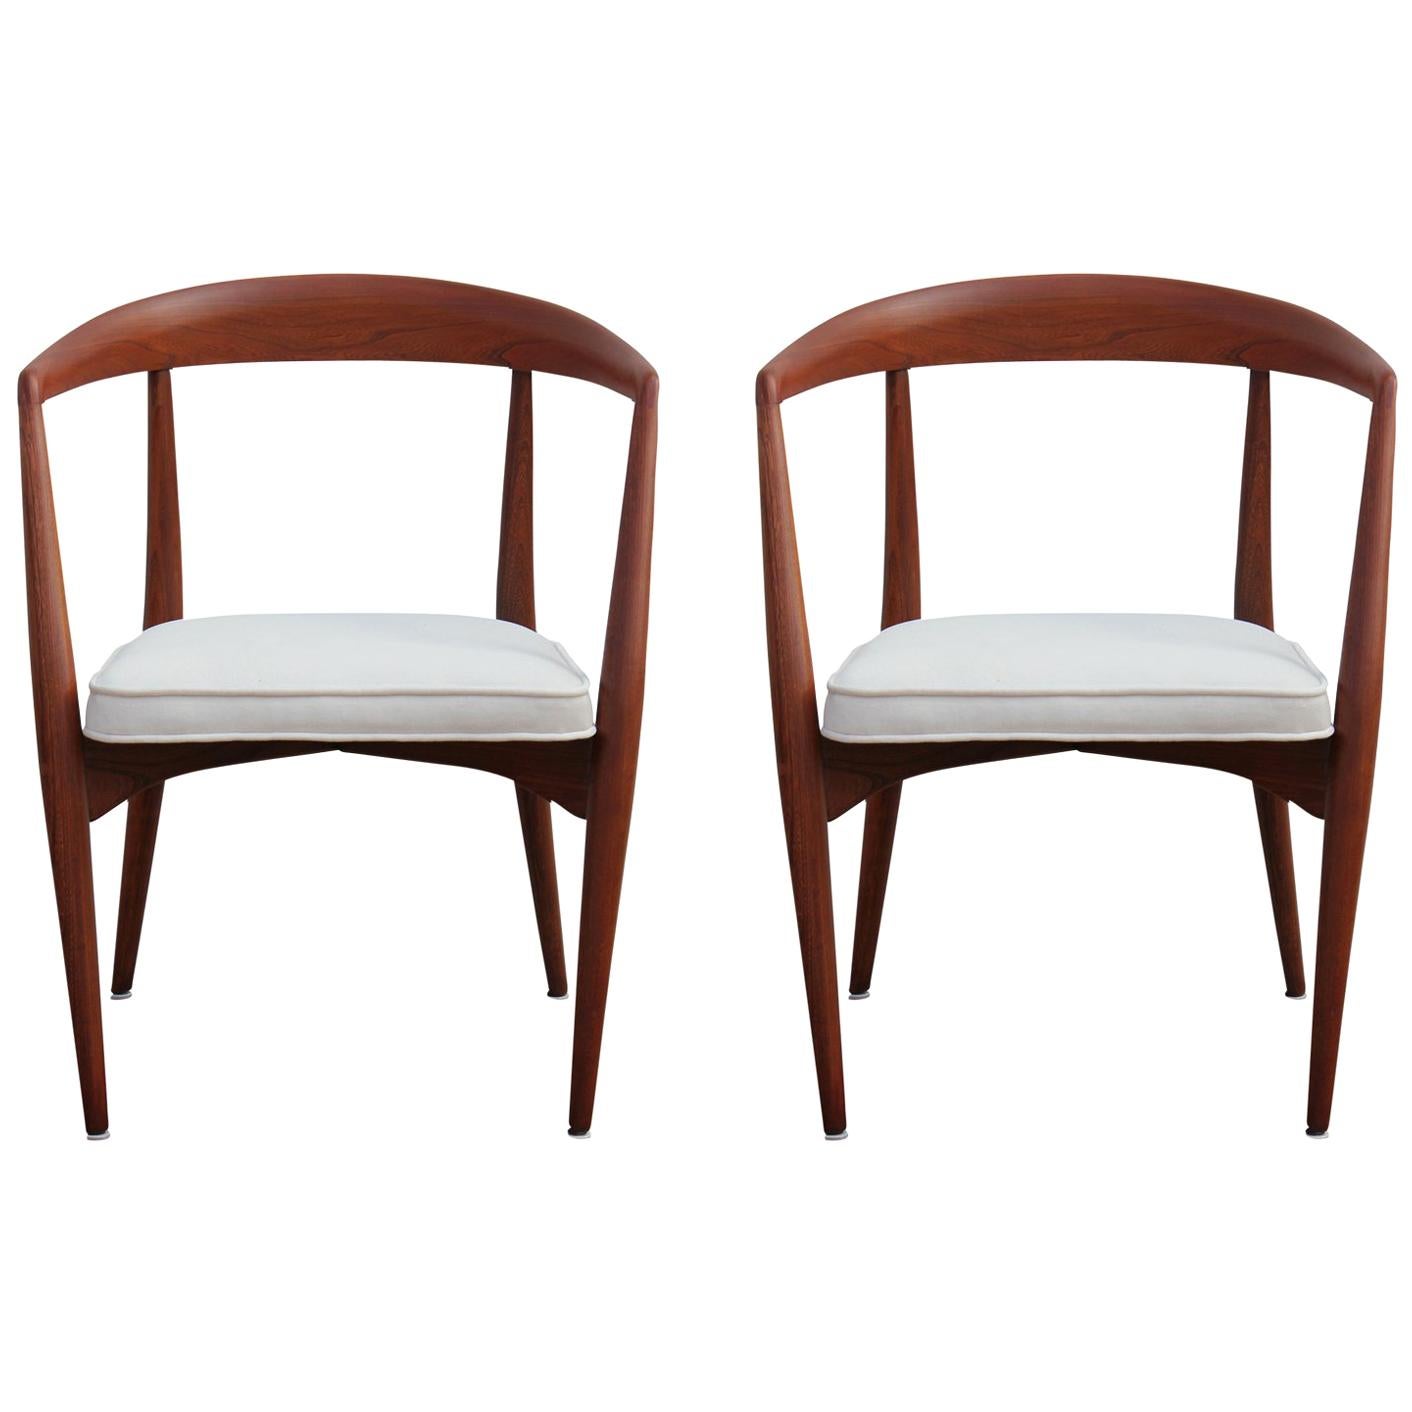 Pair of Modern Sculptural White Velvet Dining Chairs by Lawrence Peabody